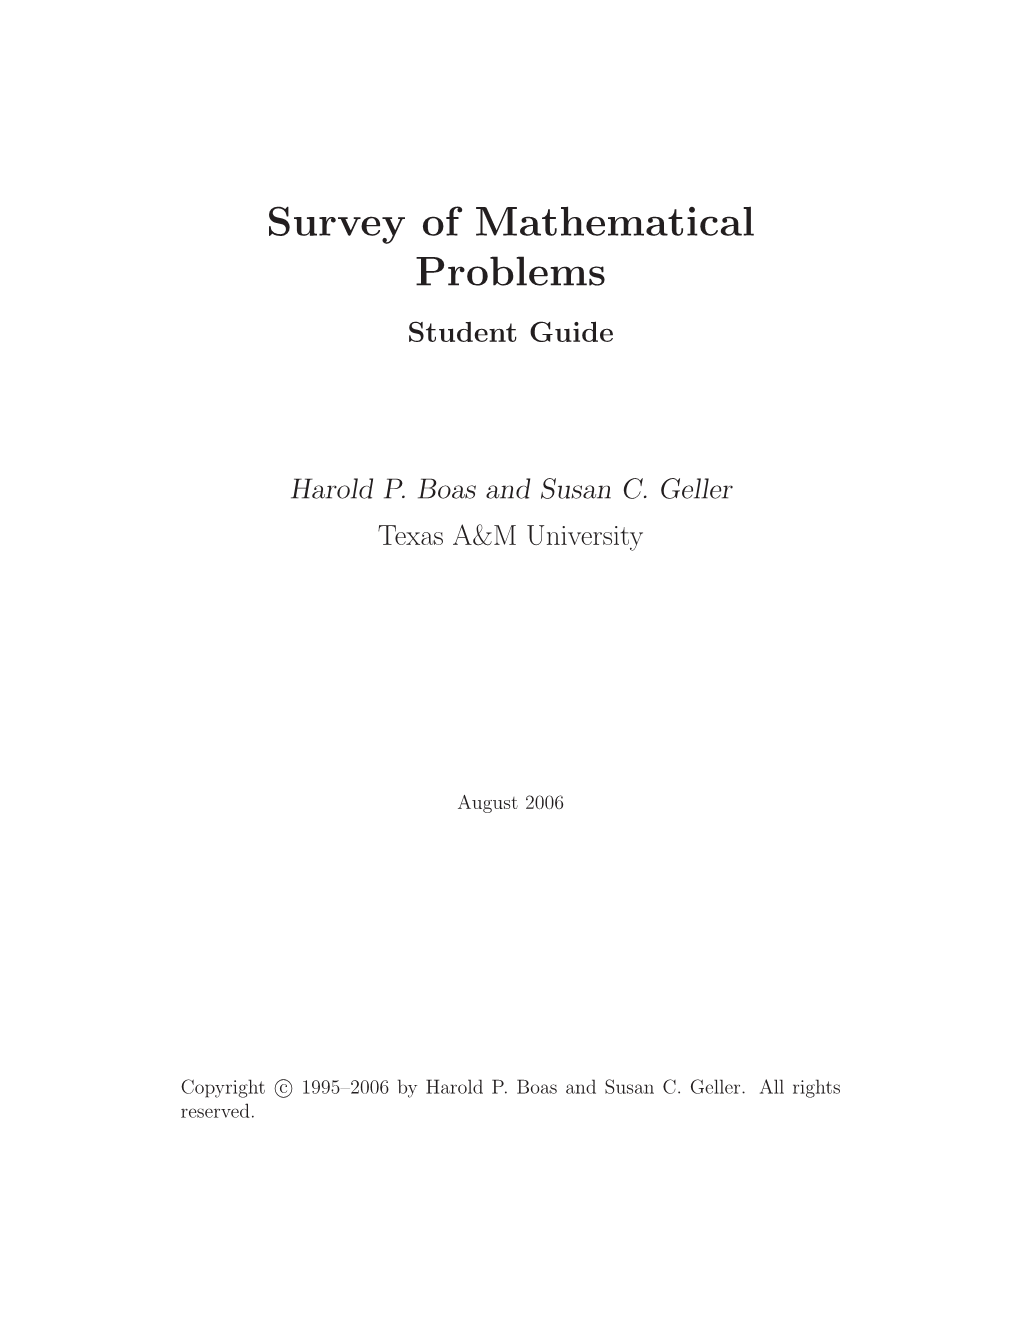 Survey of Mathematical Problems Student Guide